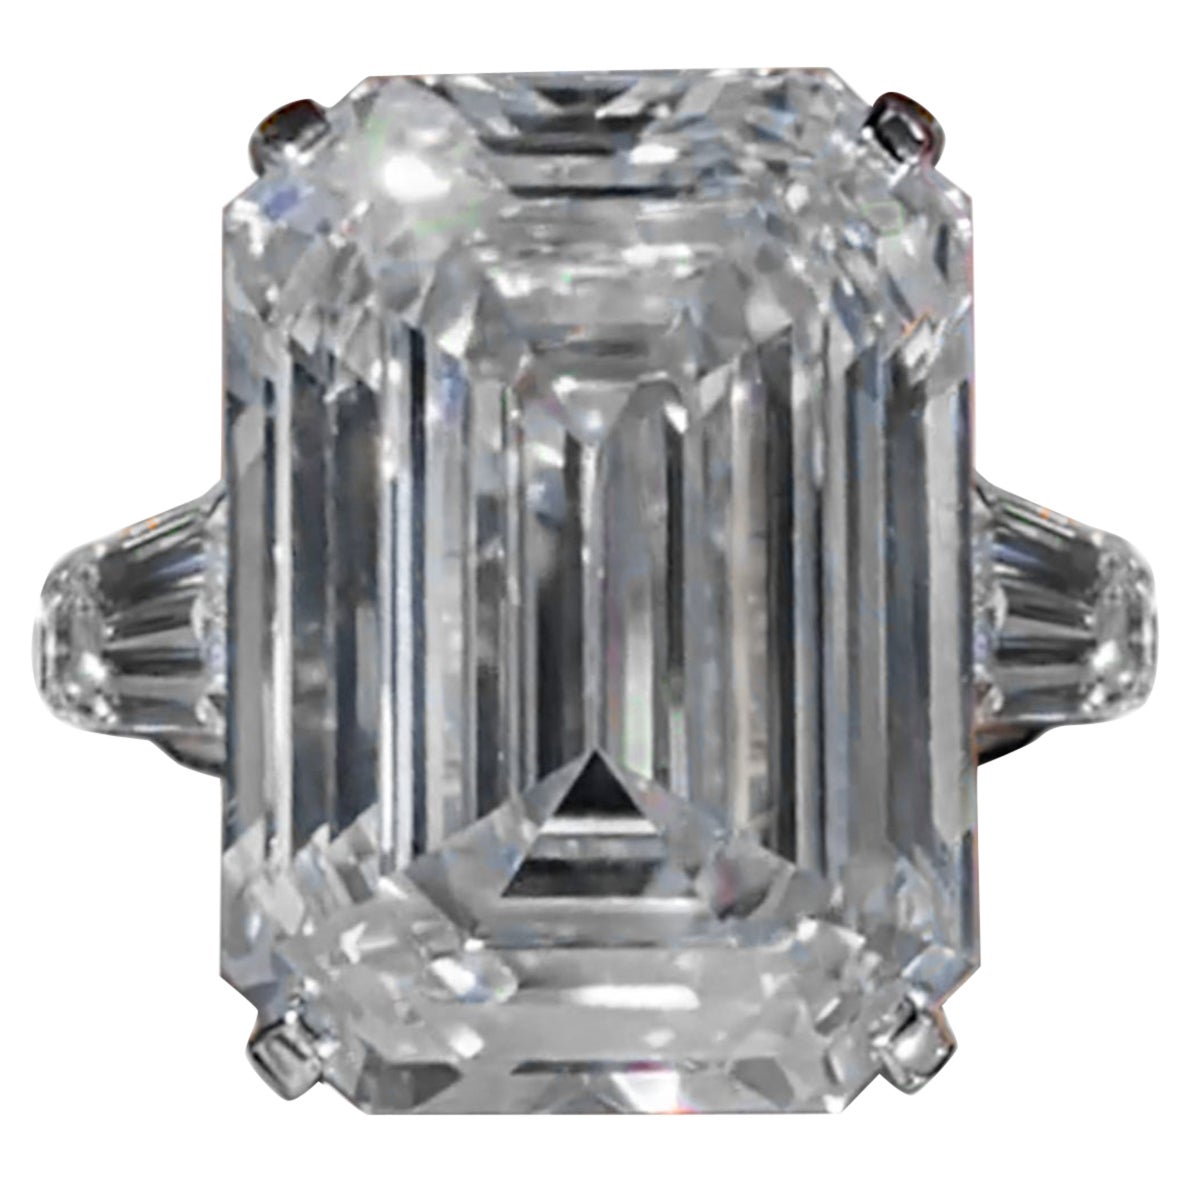 EXCEPTIONAL GIA Certified 6.55 Carat Emerald Cut Diamond Ring